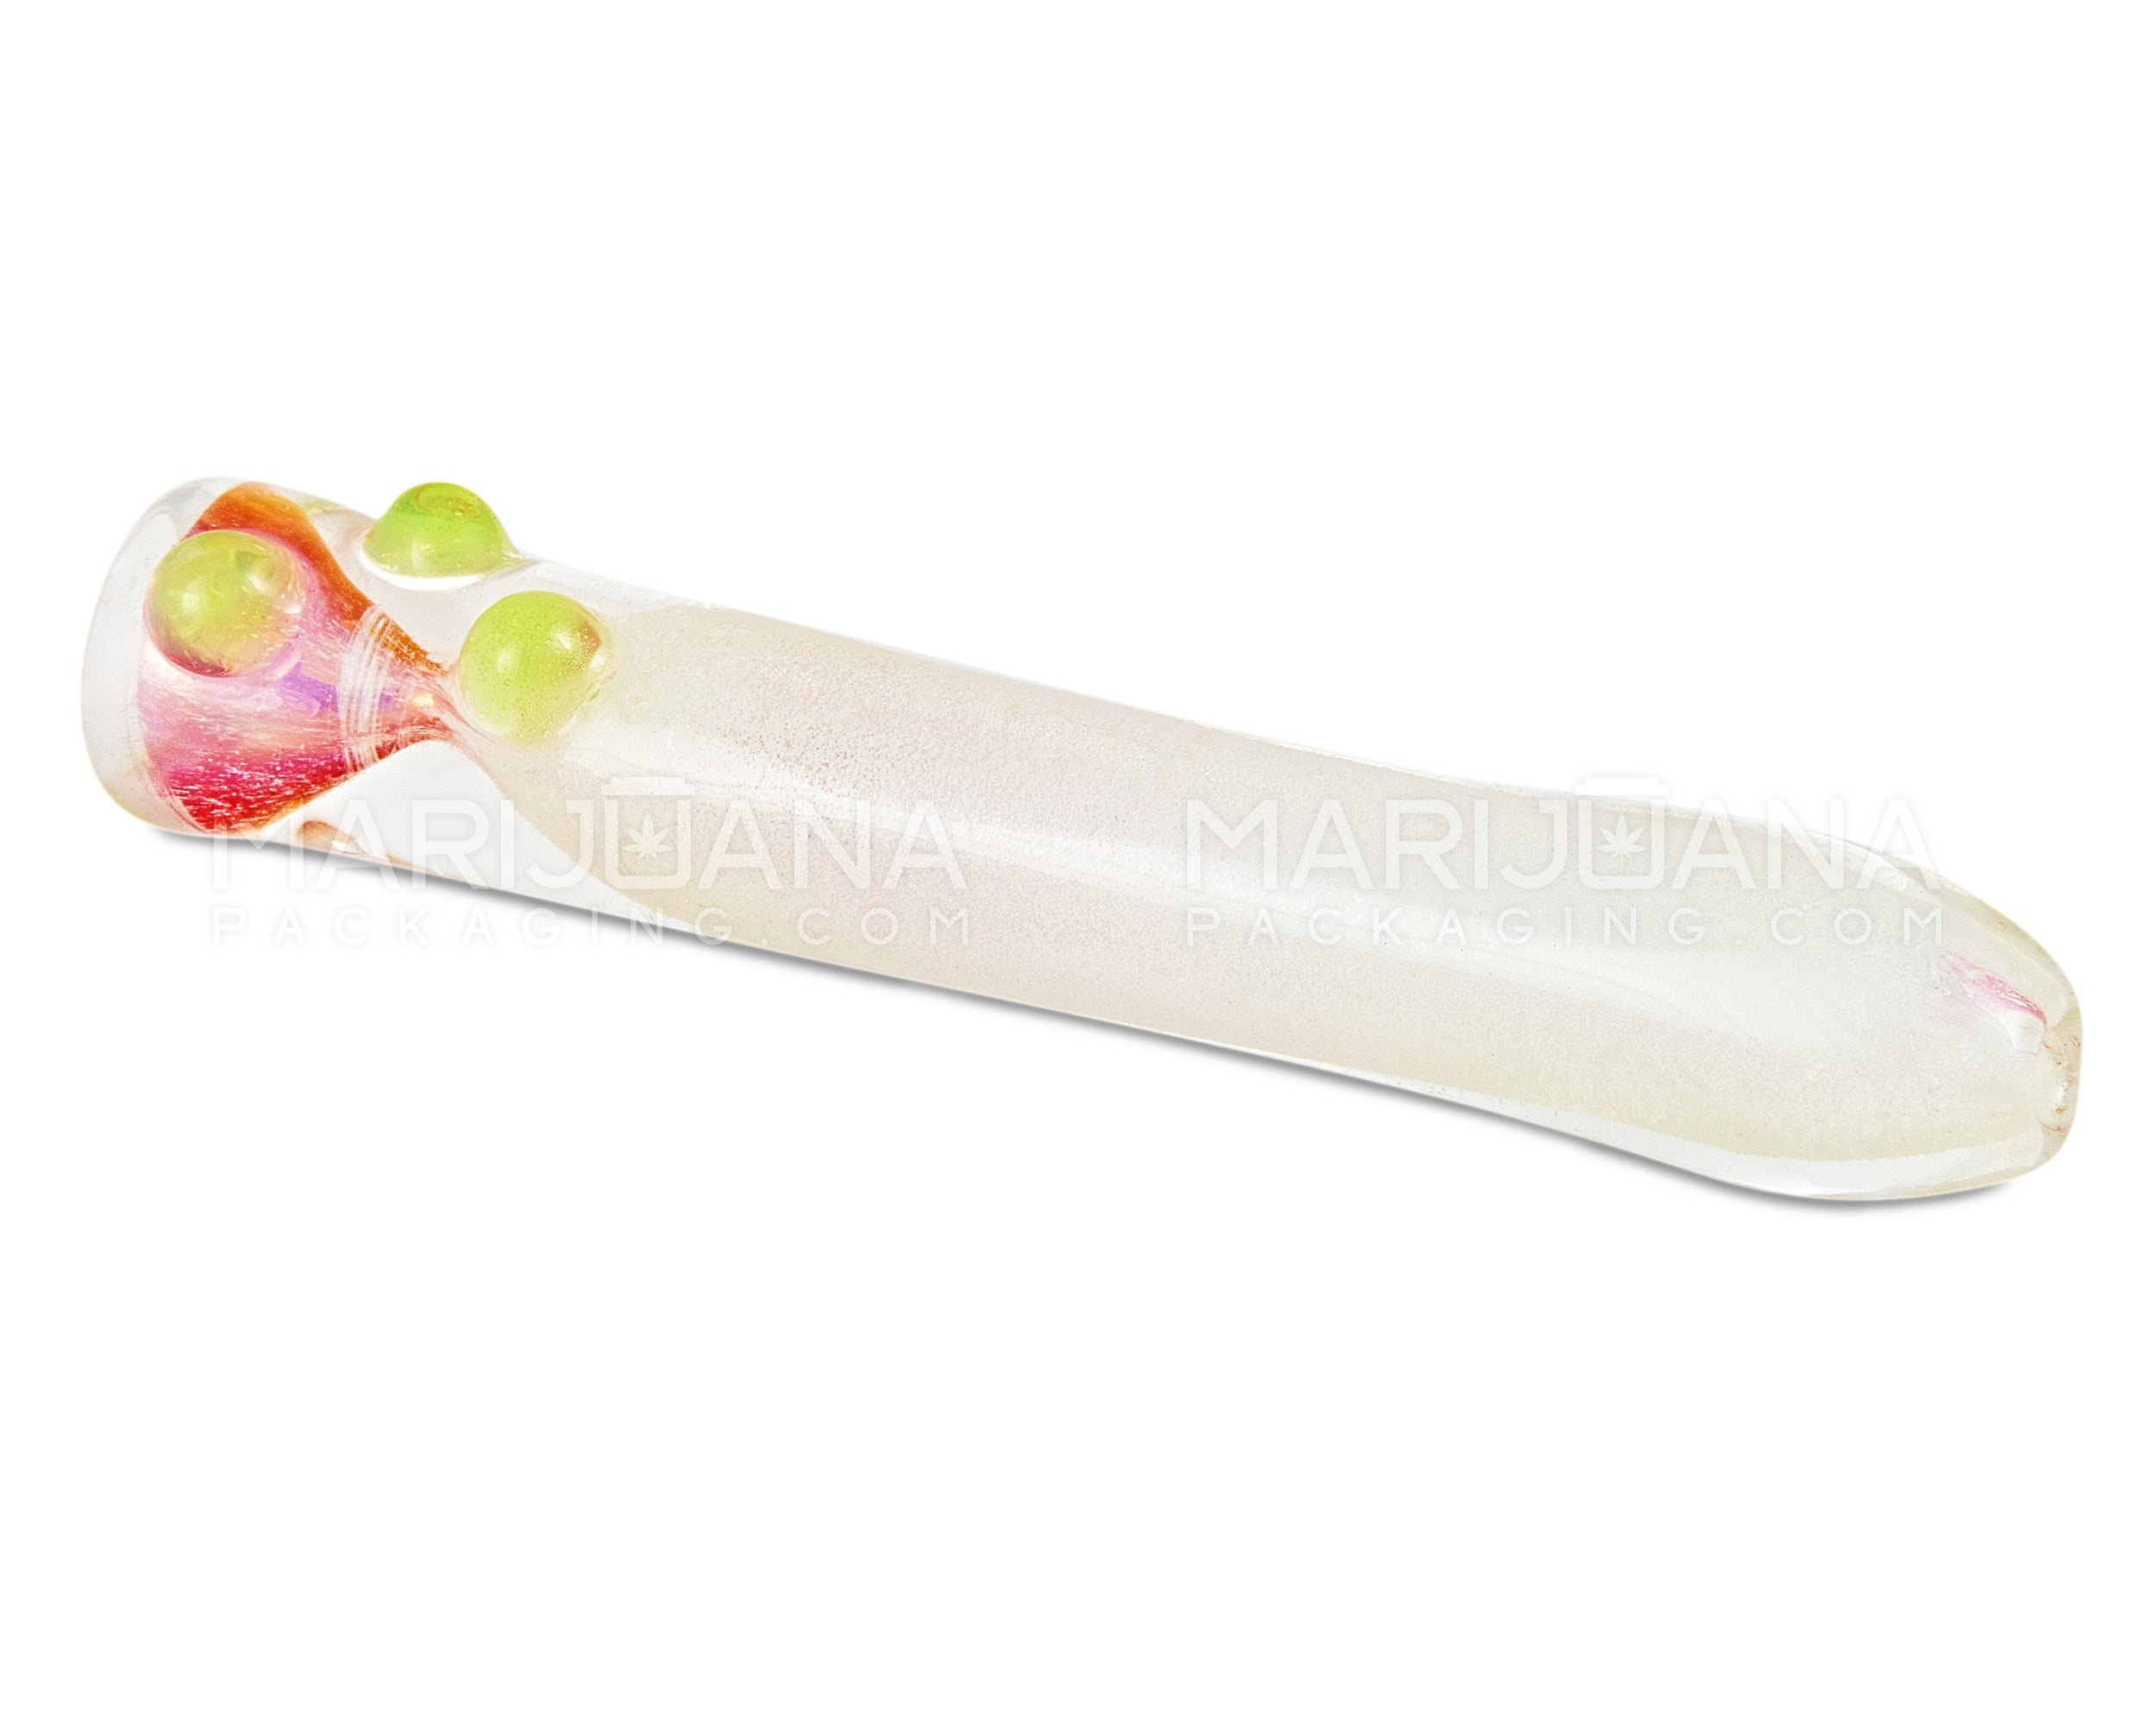 Glow-in-the-Dark | Spiral Chillum Hand Pipe | 3.5in Long - Glass - Assorted - 5